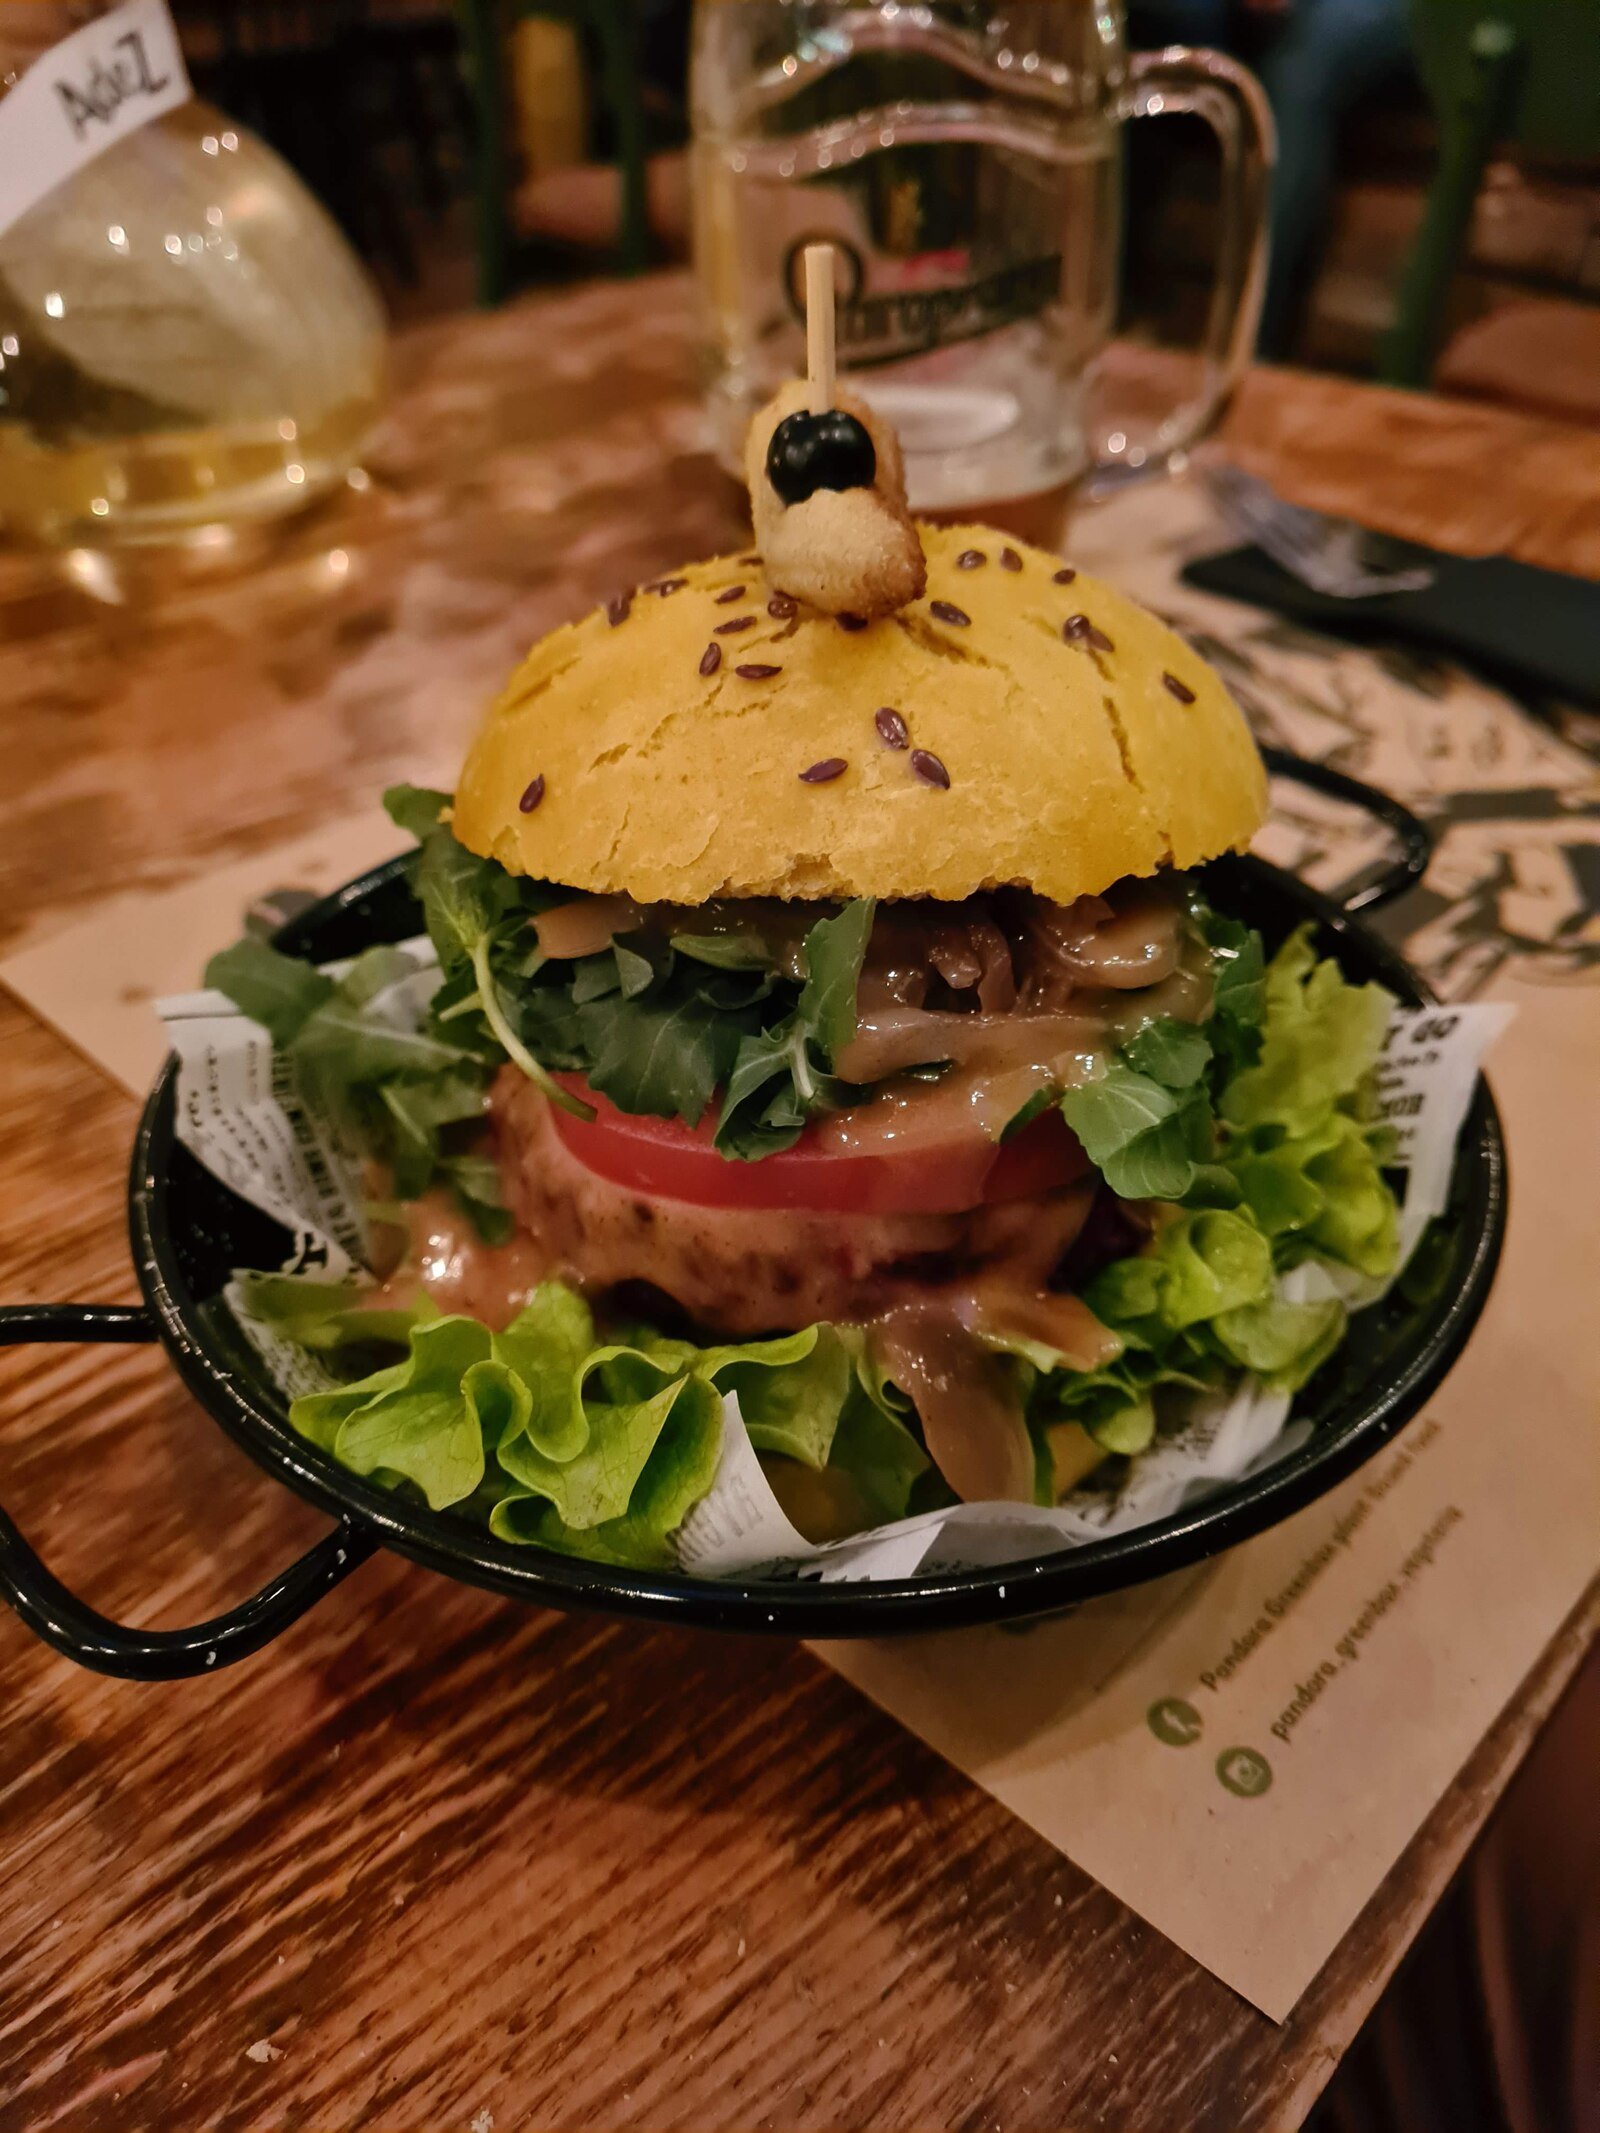 A large burger filled with many colourful incidents on a wooden table